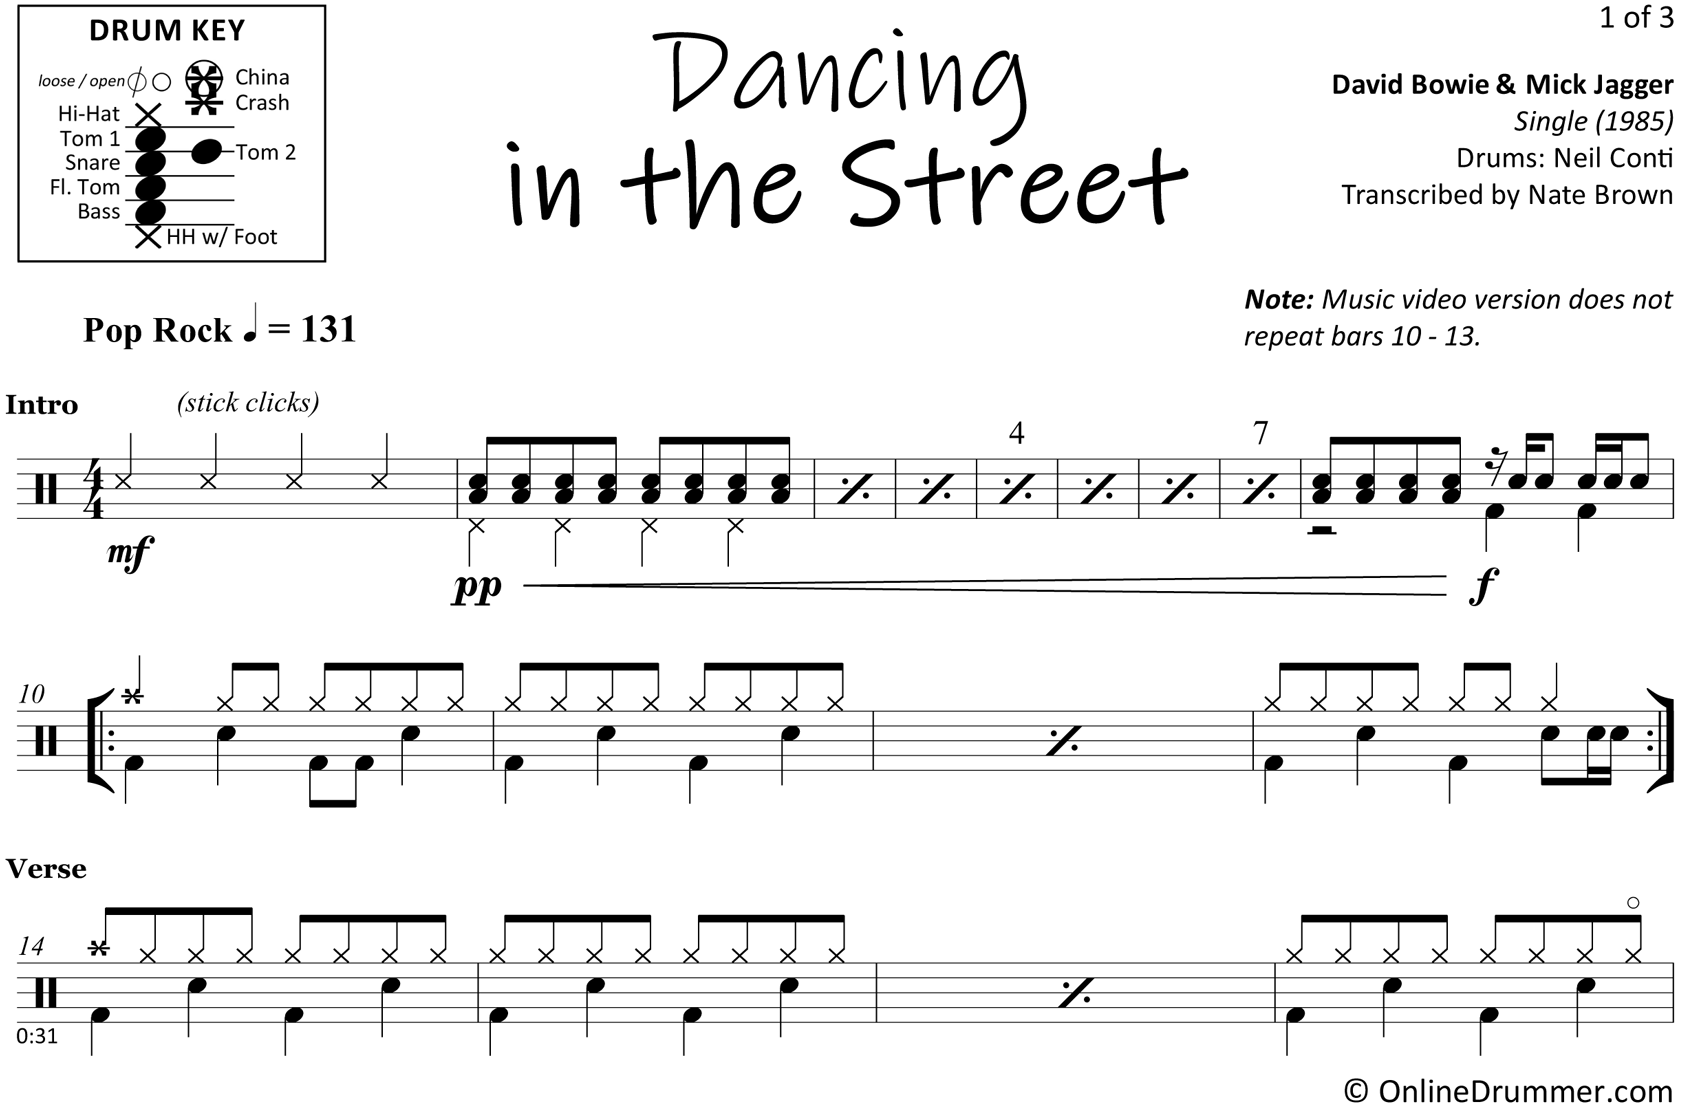 Dancing in the Street - David Bowie & Mick Jagger - Drum Sheet Music